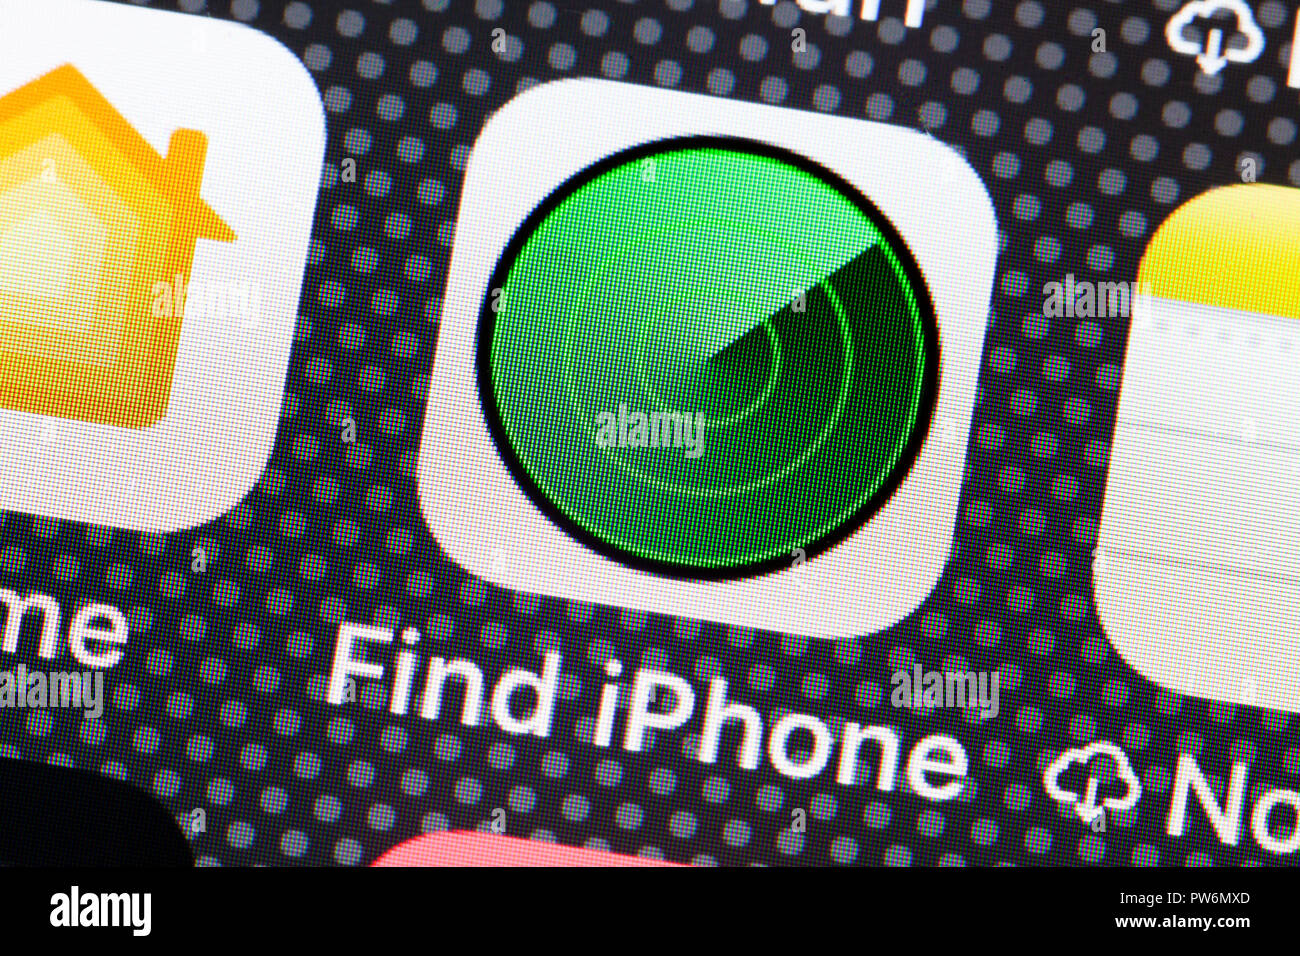 Find iPhone app icon on iPhone (close up, macro) - USA Stock Photo